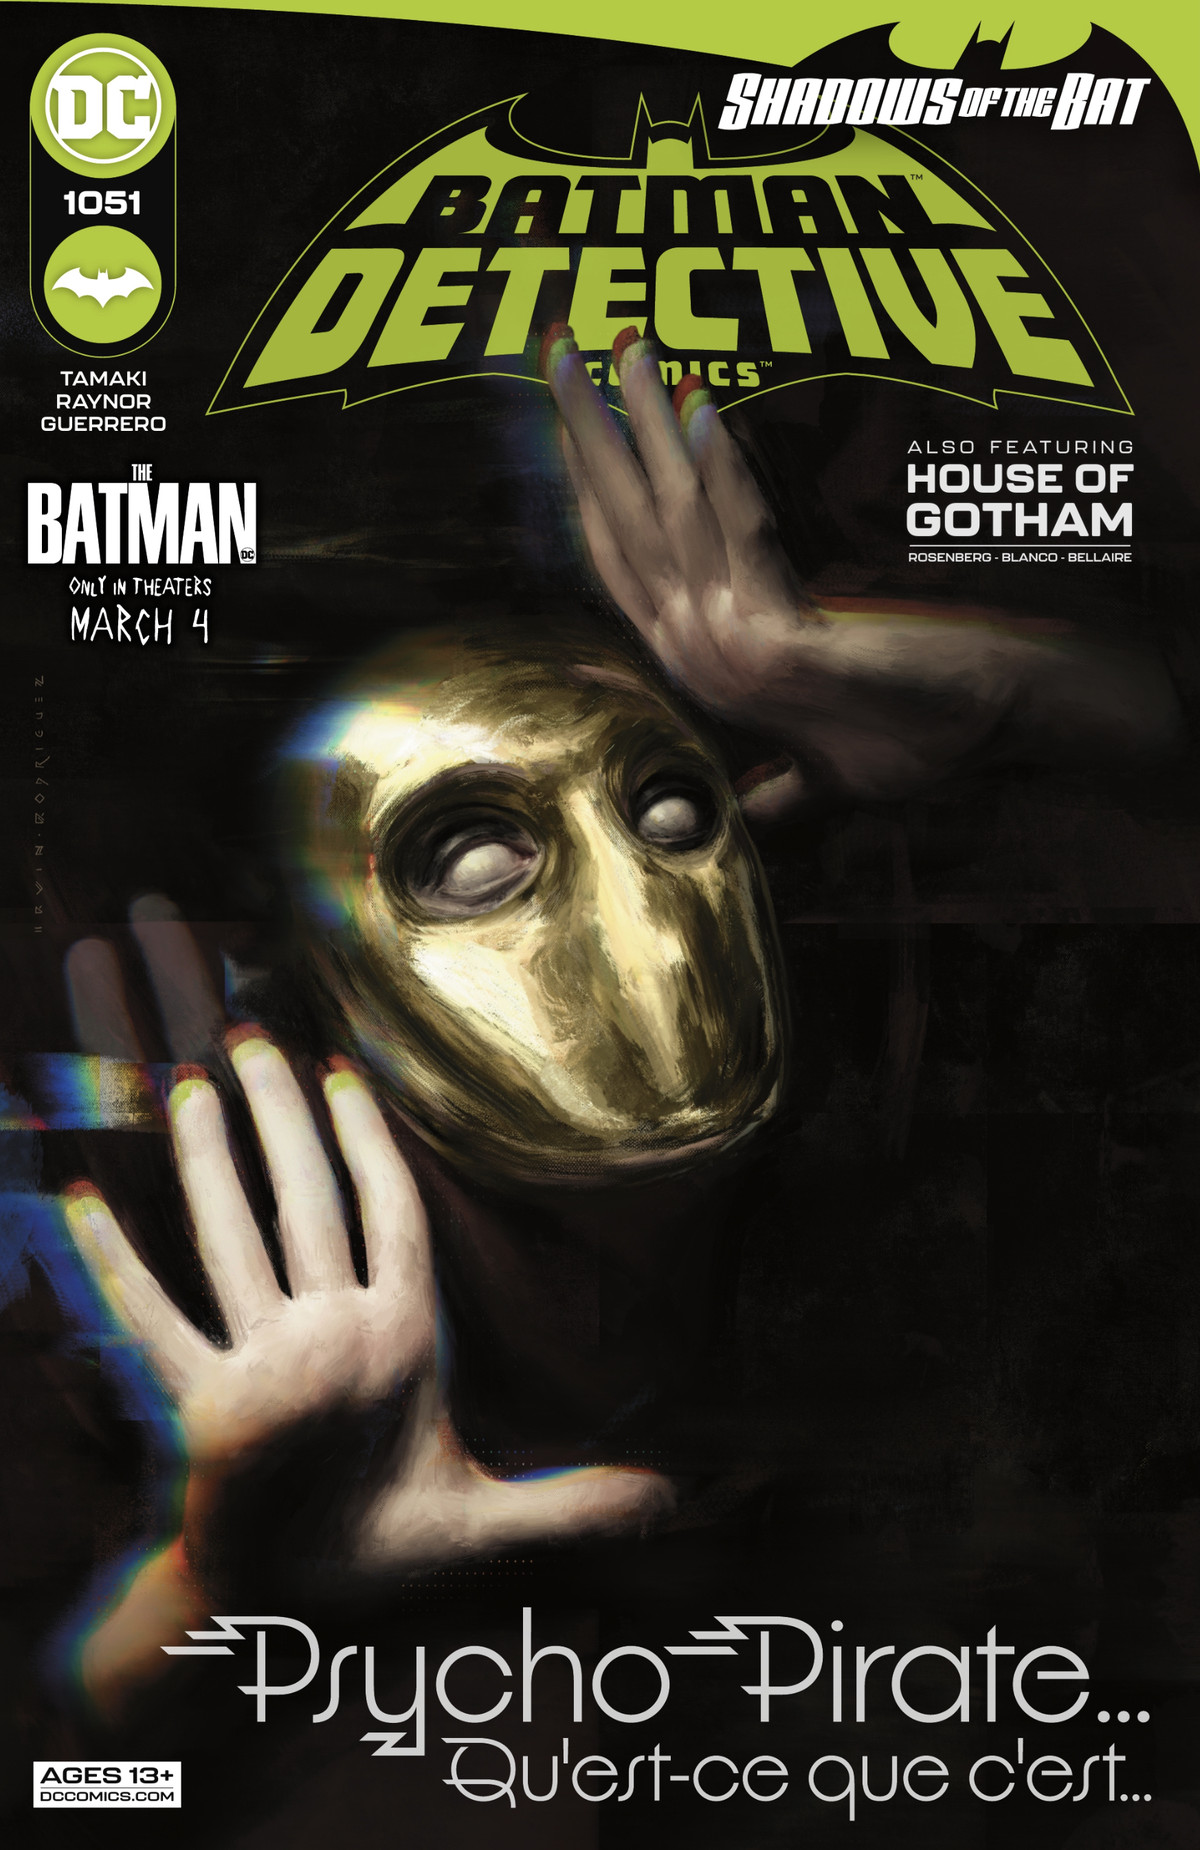 The Psycho Pirate’s hands gesture wildly around his impassive mask, with text reading “Psycho Pirate... Qu’est-ce que c-est” on the cover of Detective Comics #1051 (2022).